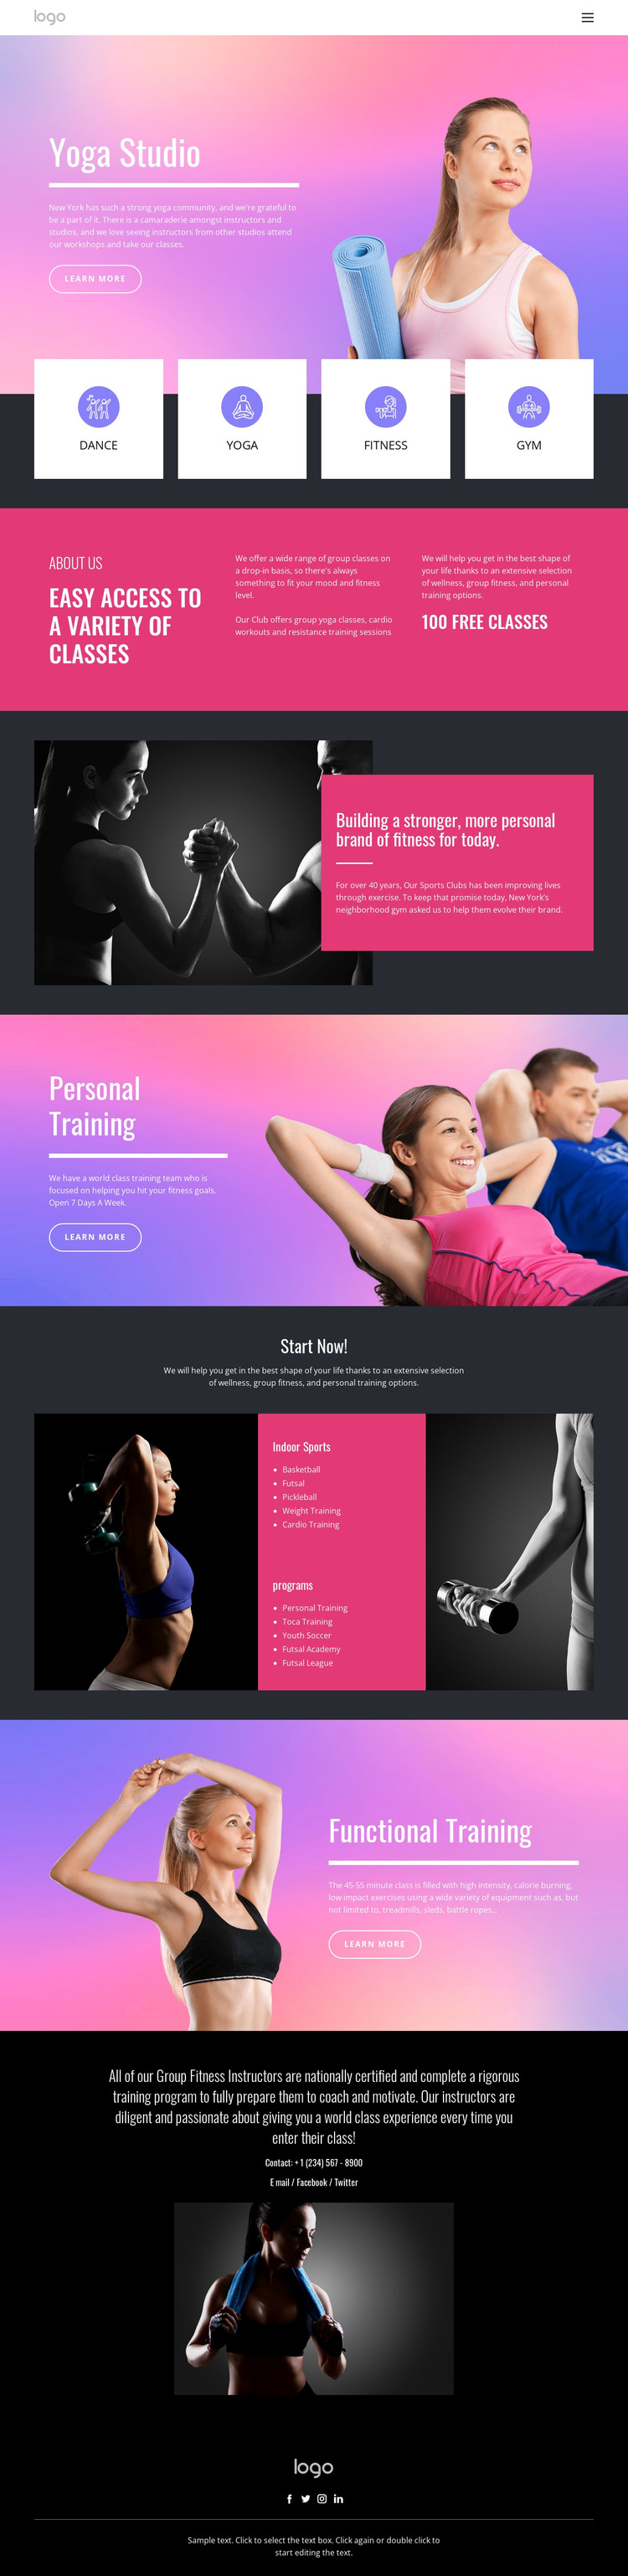 Wellness practice for self-inquiry HTML Template